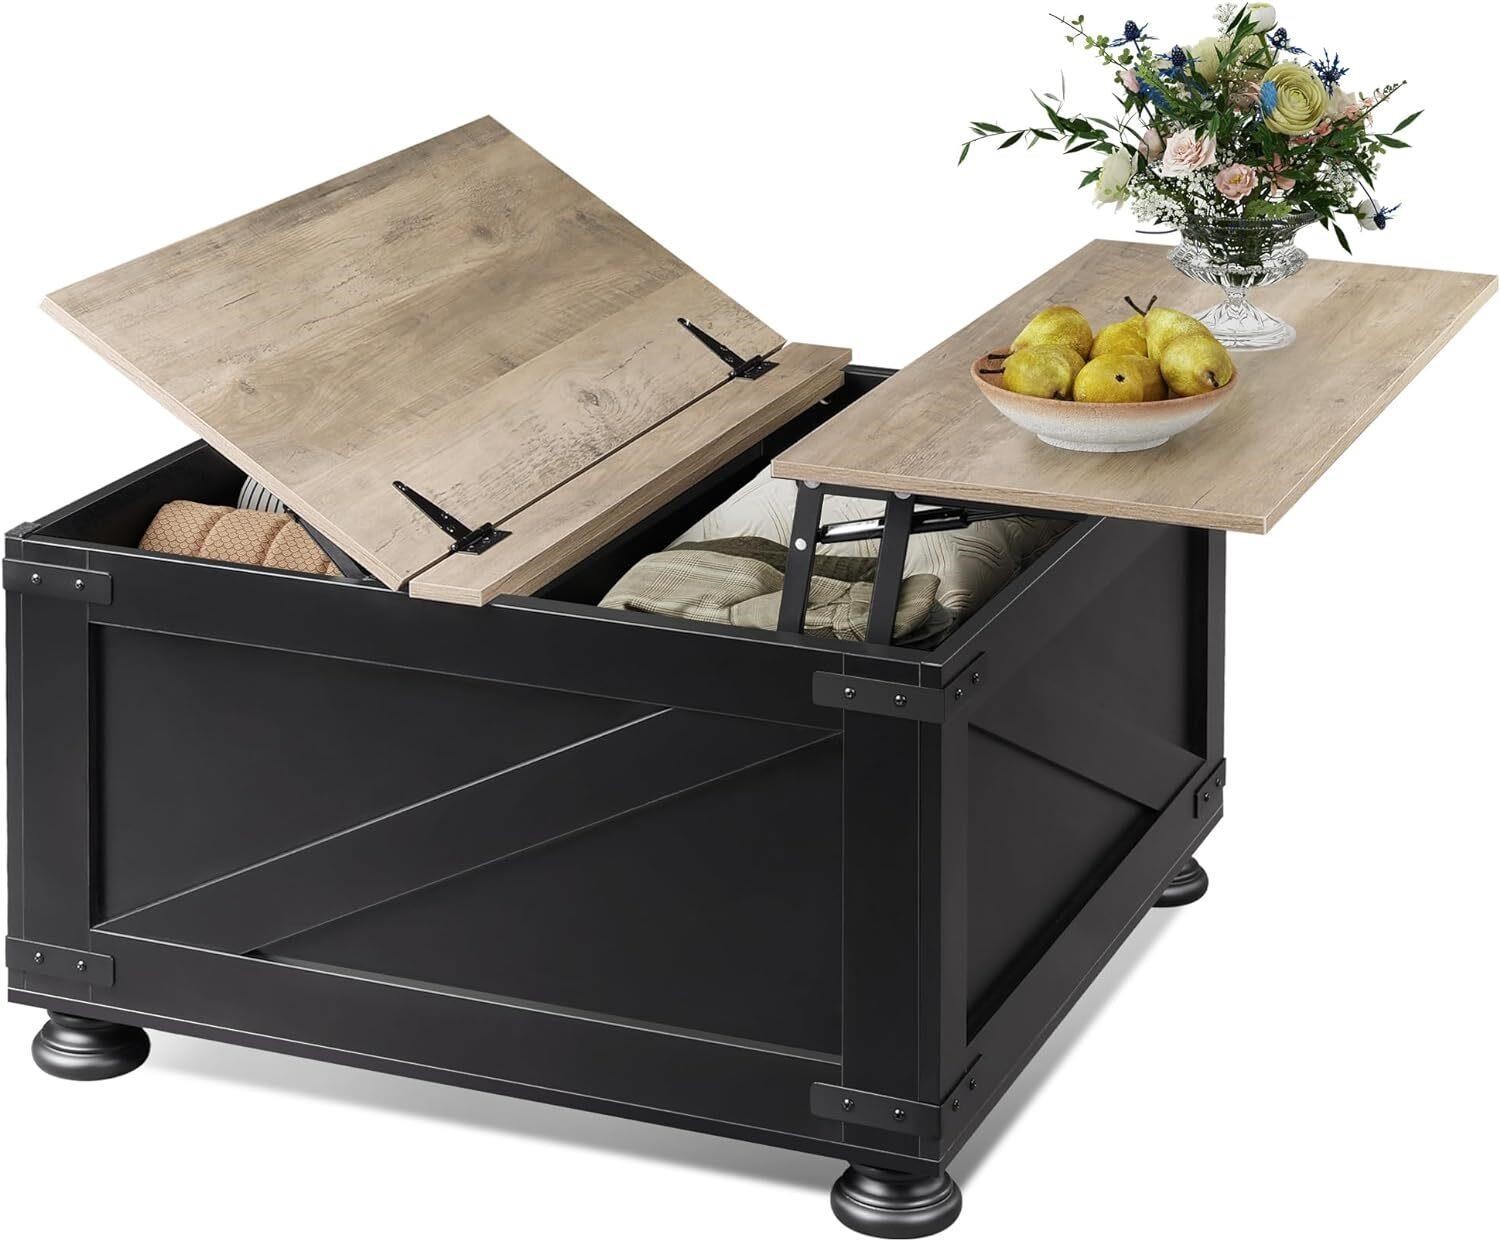 $190  WLIVE Coffee Table  Lift Top  Black/Grey